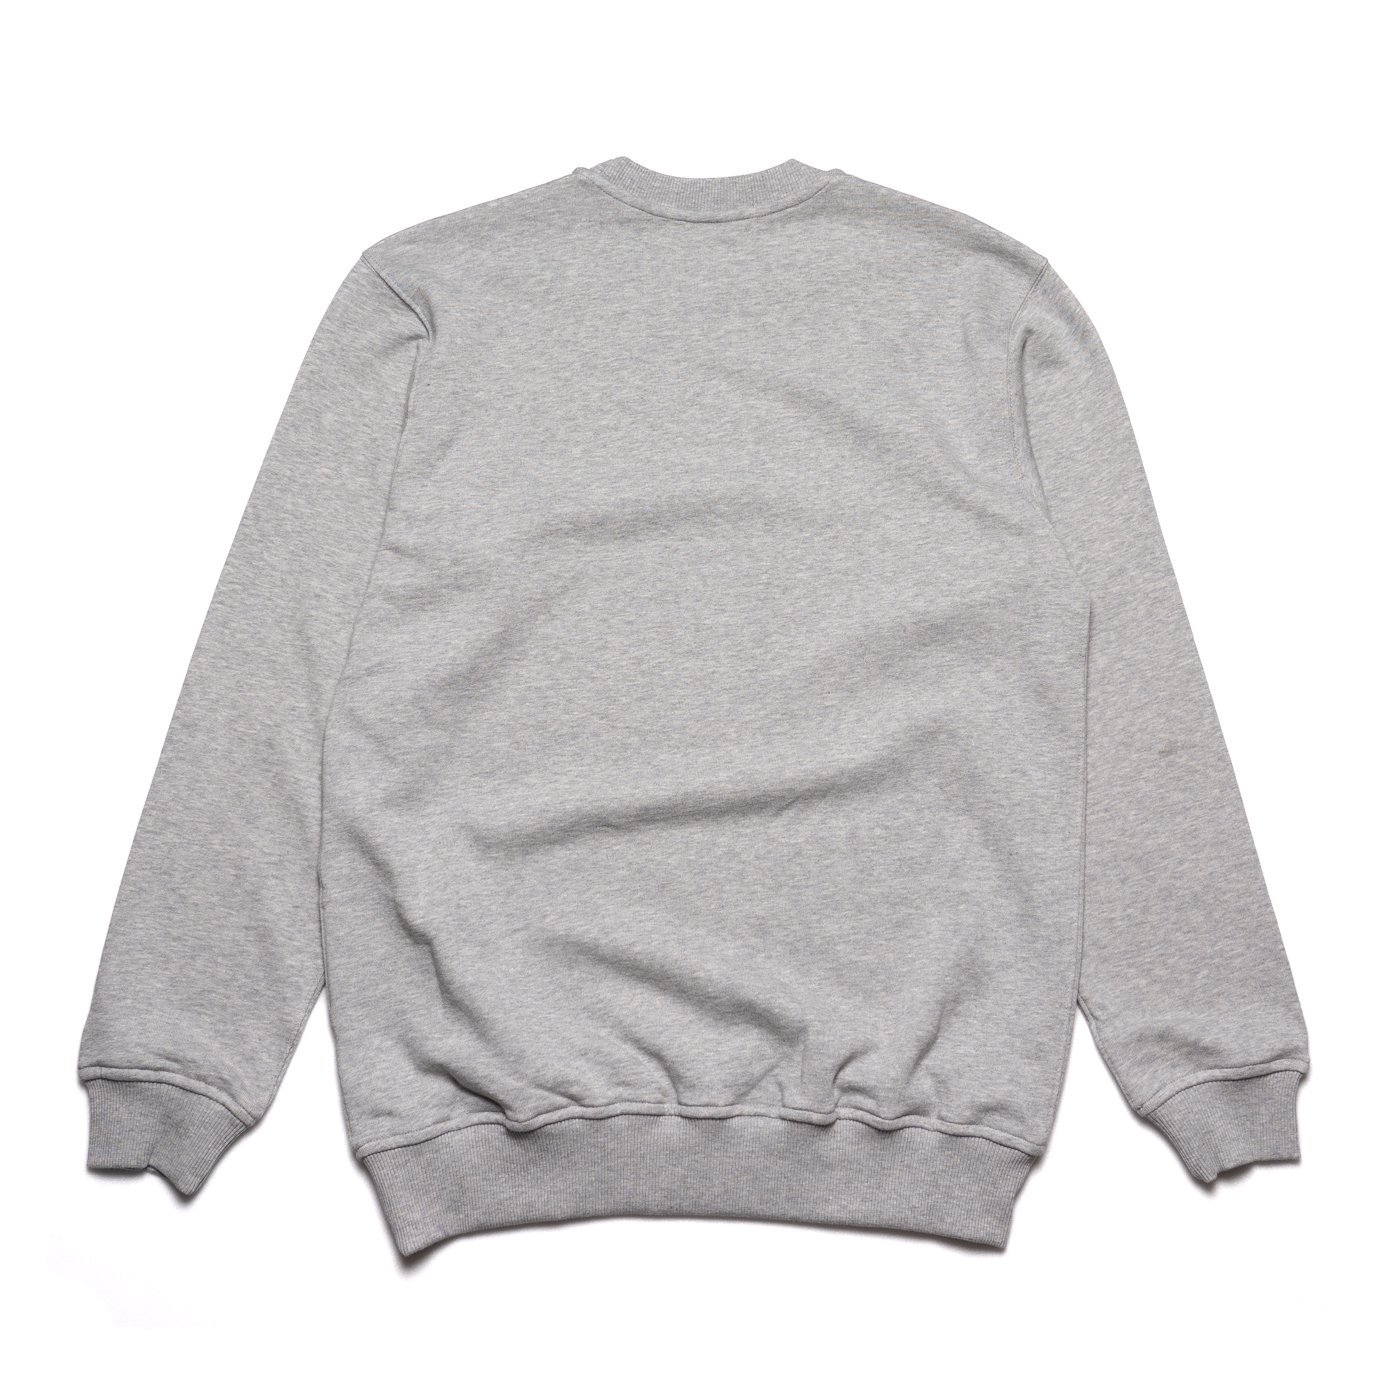 COMME des GARCONS SHIRT * 24SS Collection Crew Neck Sweat Print G by Andy Warhol * Top Grey